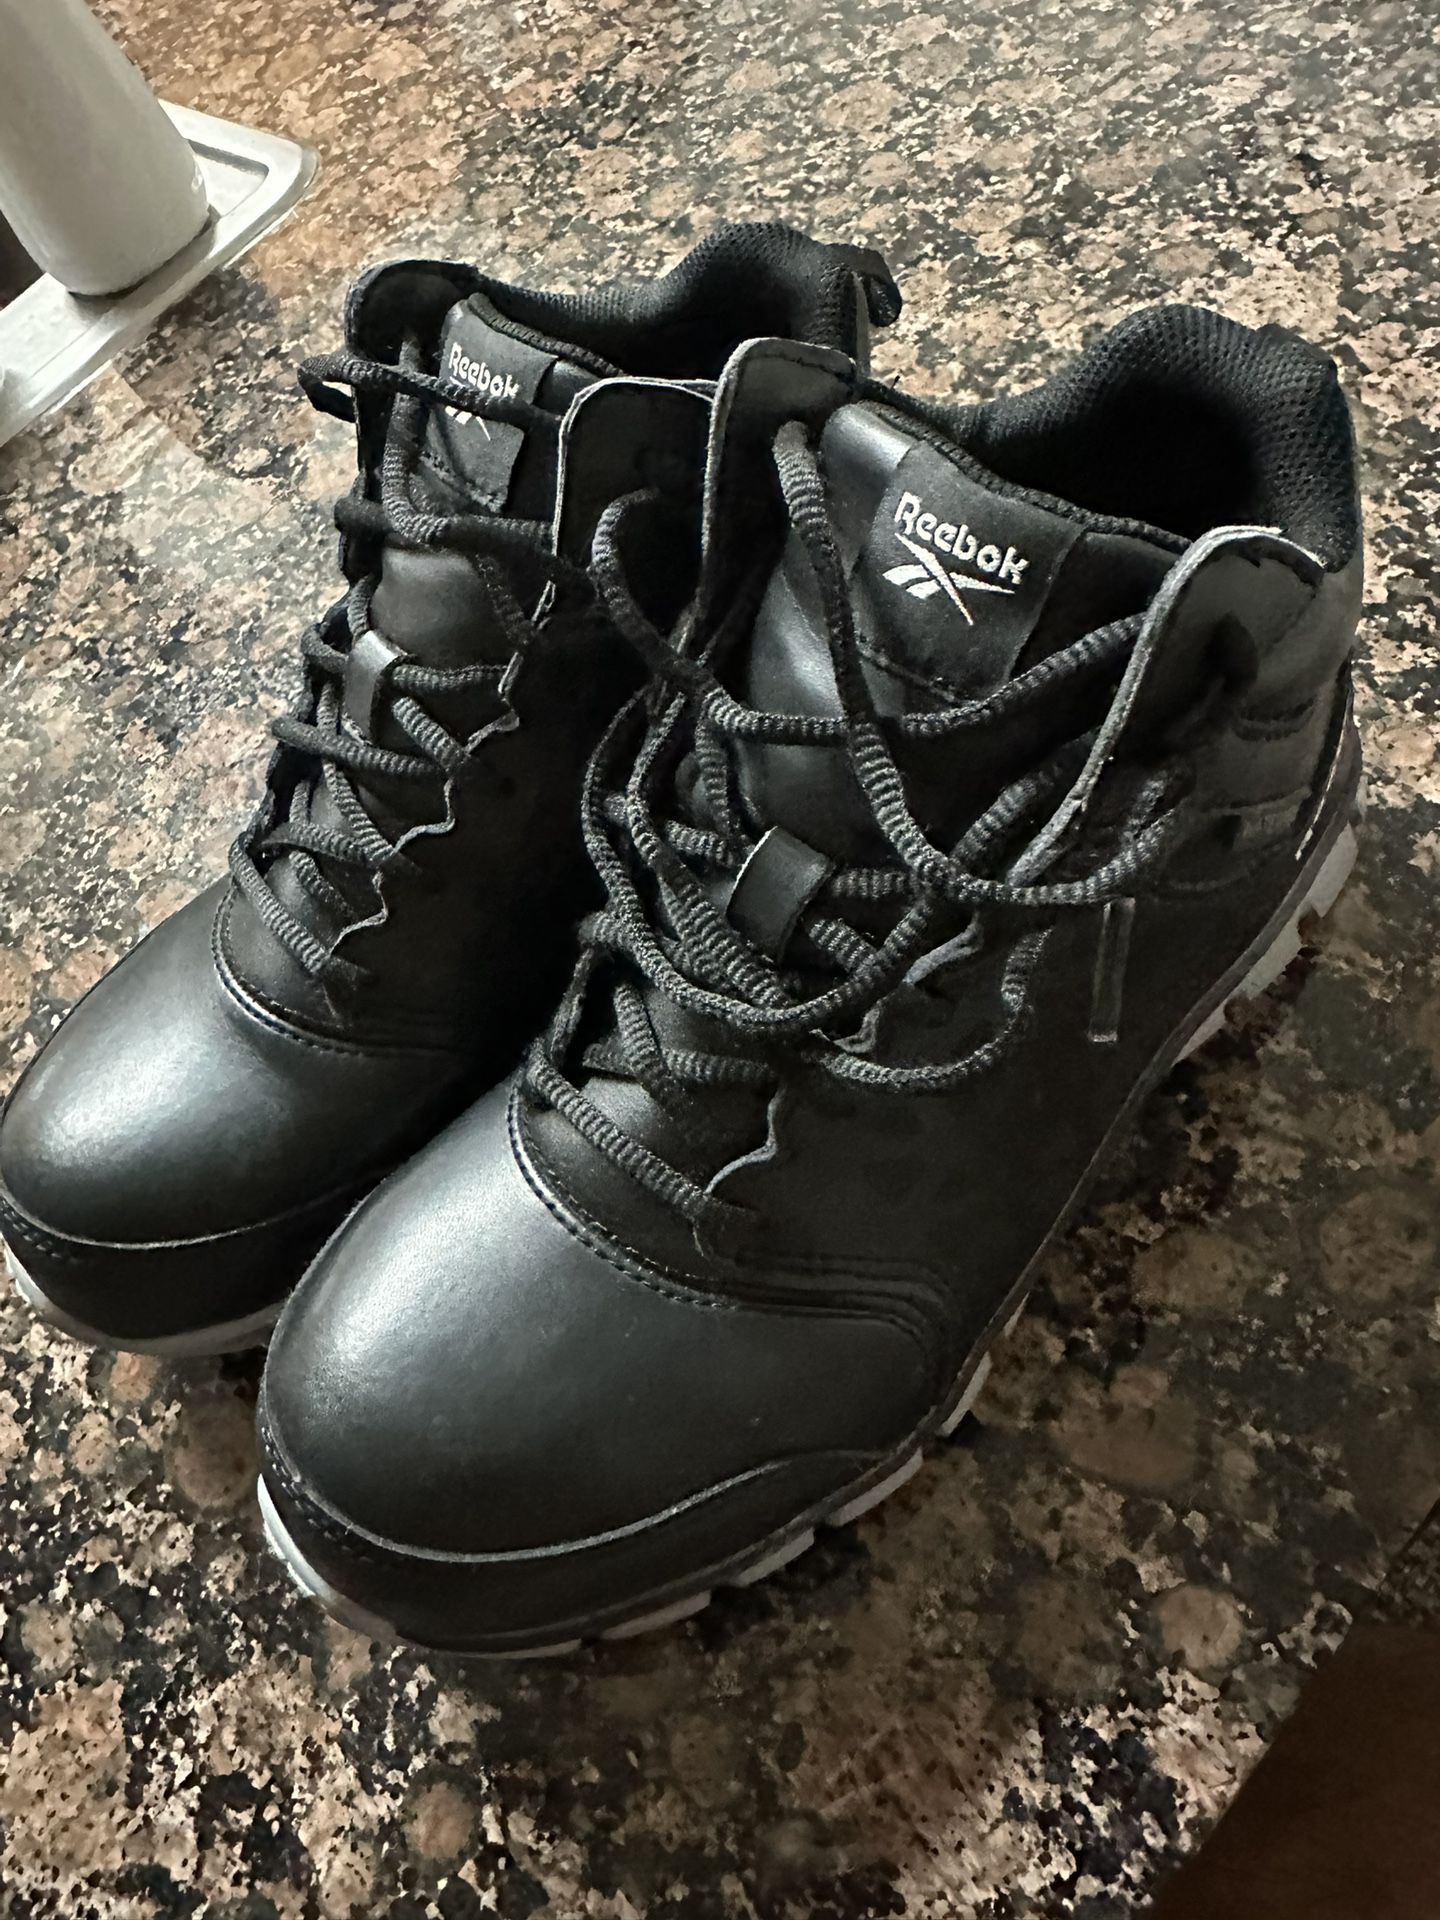 Reebok Safe Boots For Women Size 8